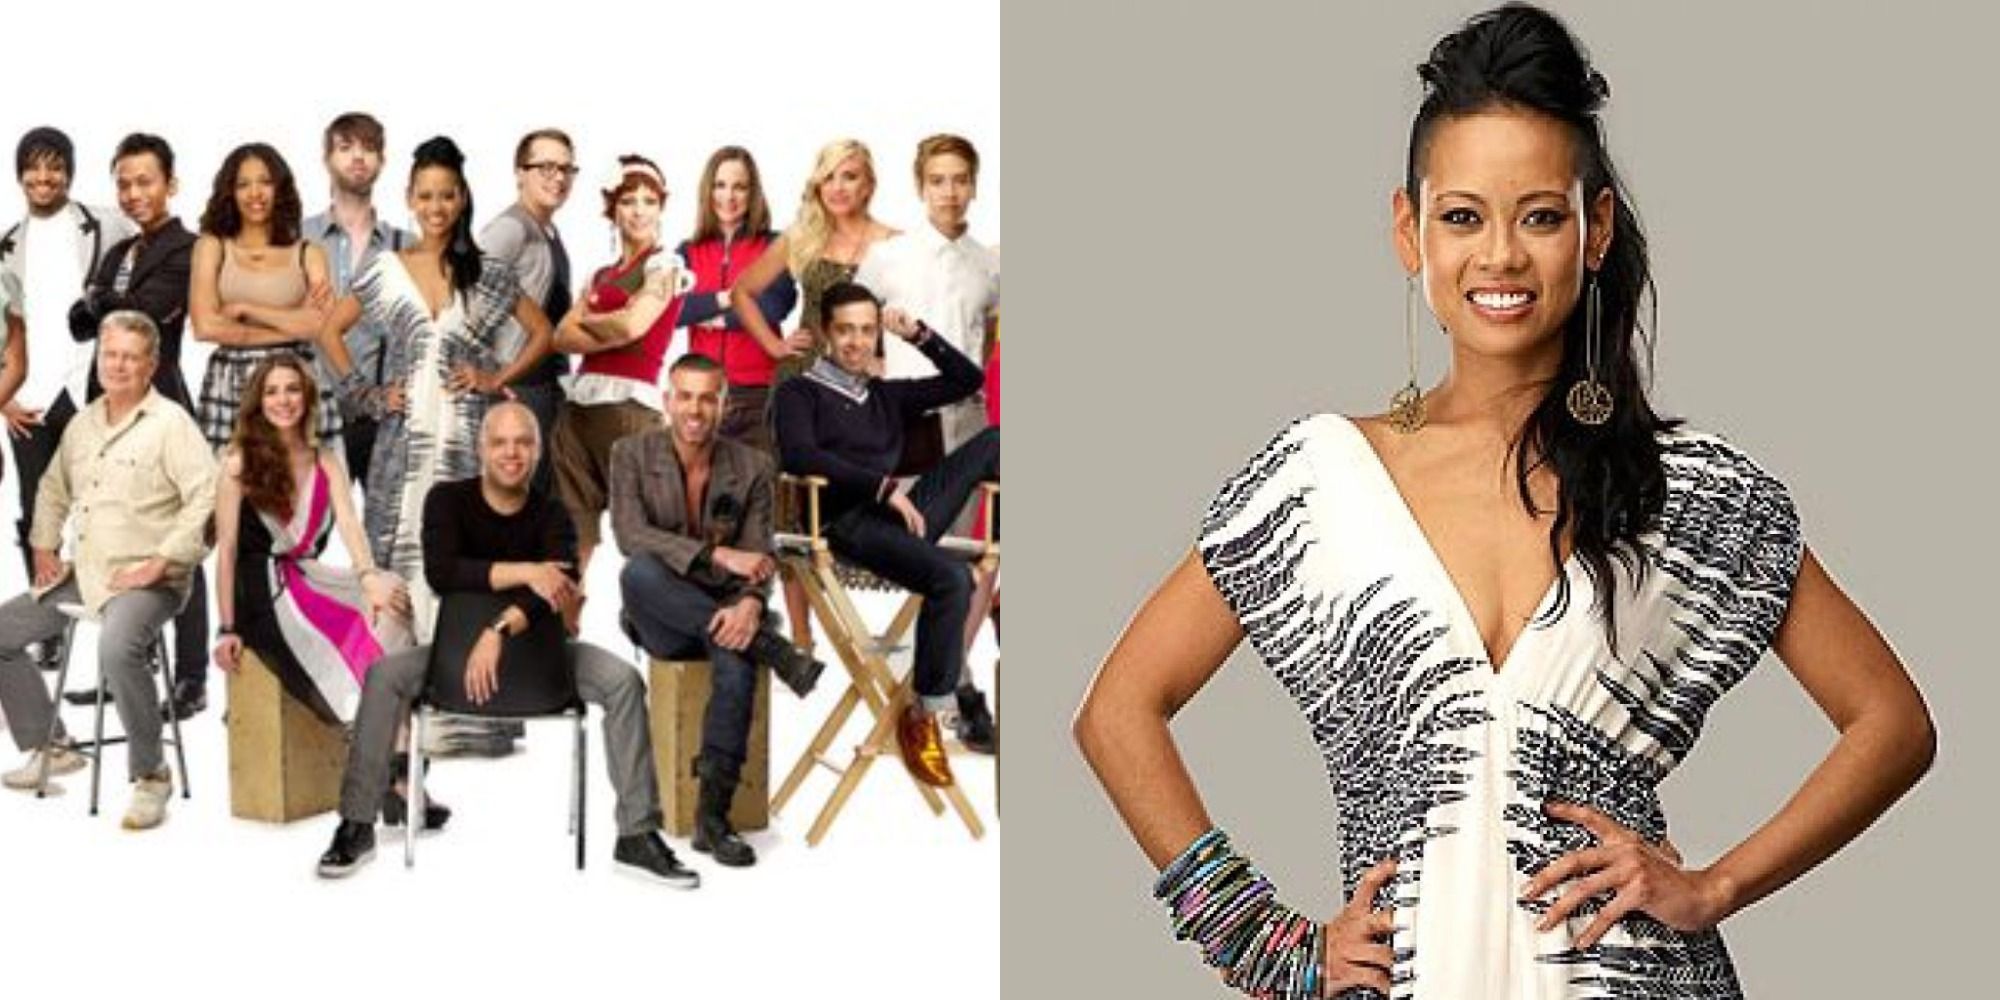 Split image showing the cast of Project Runway Season 9, and the winner, Anya Ayoung-Chee